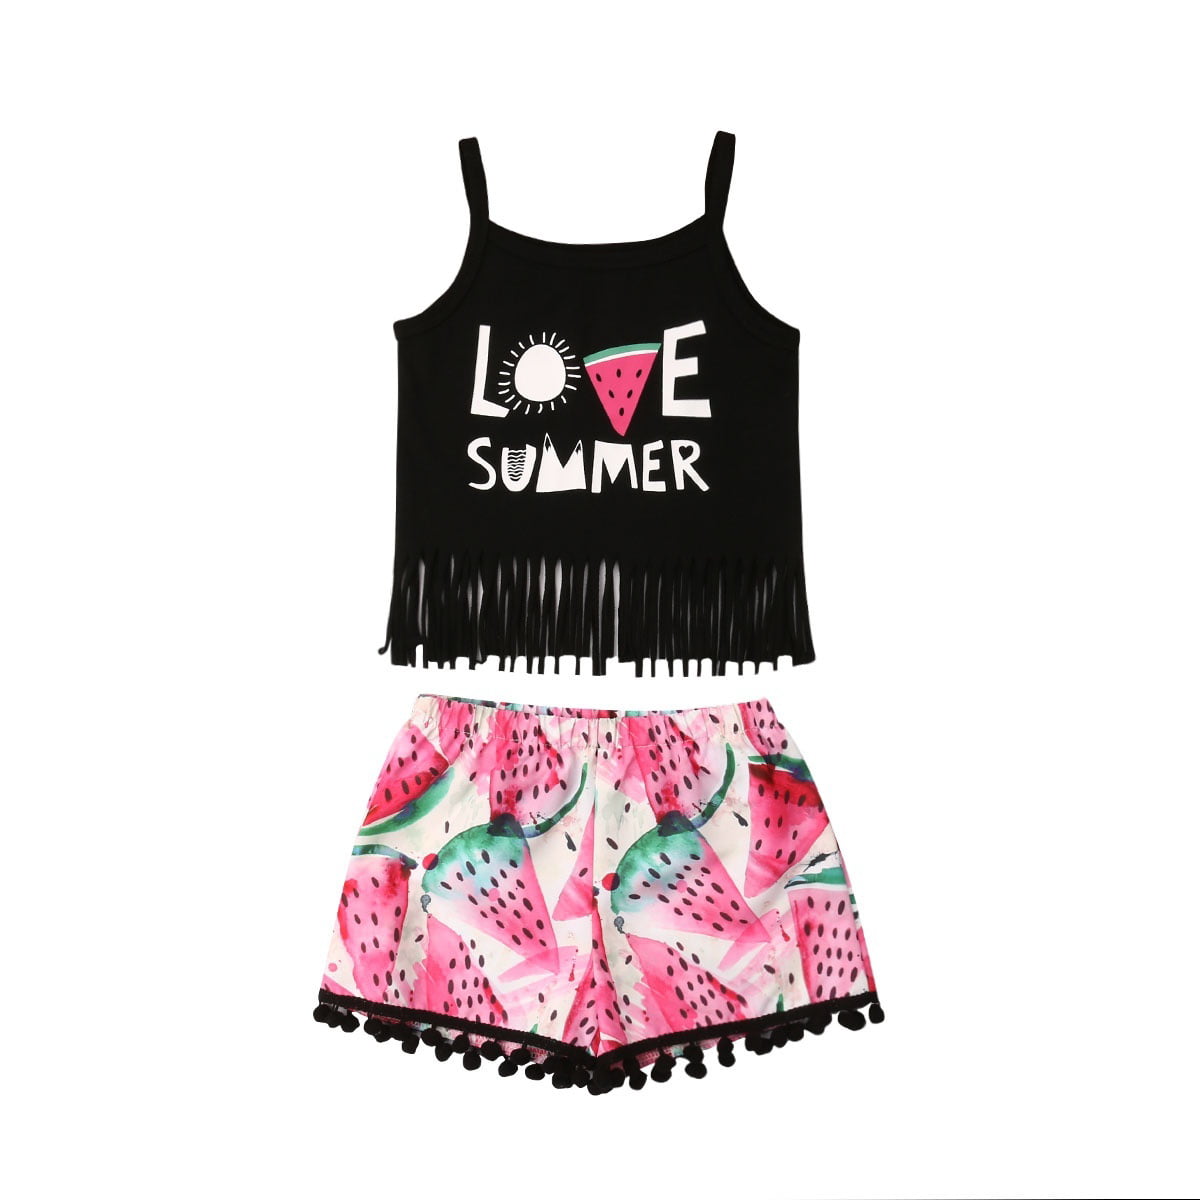 Kids Baby Girl Summer Outfits Short Sleeve Letter T-Shirt Tops Watermelon Tassel Shorts Two Pieces Set Outfit